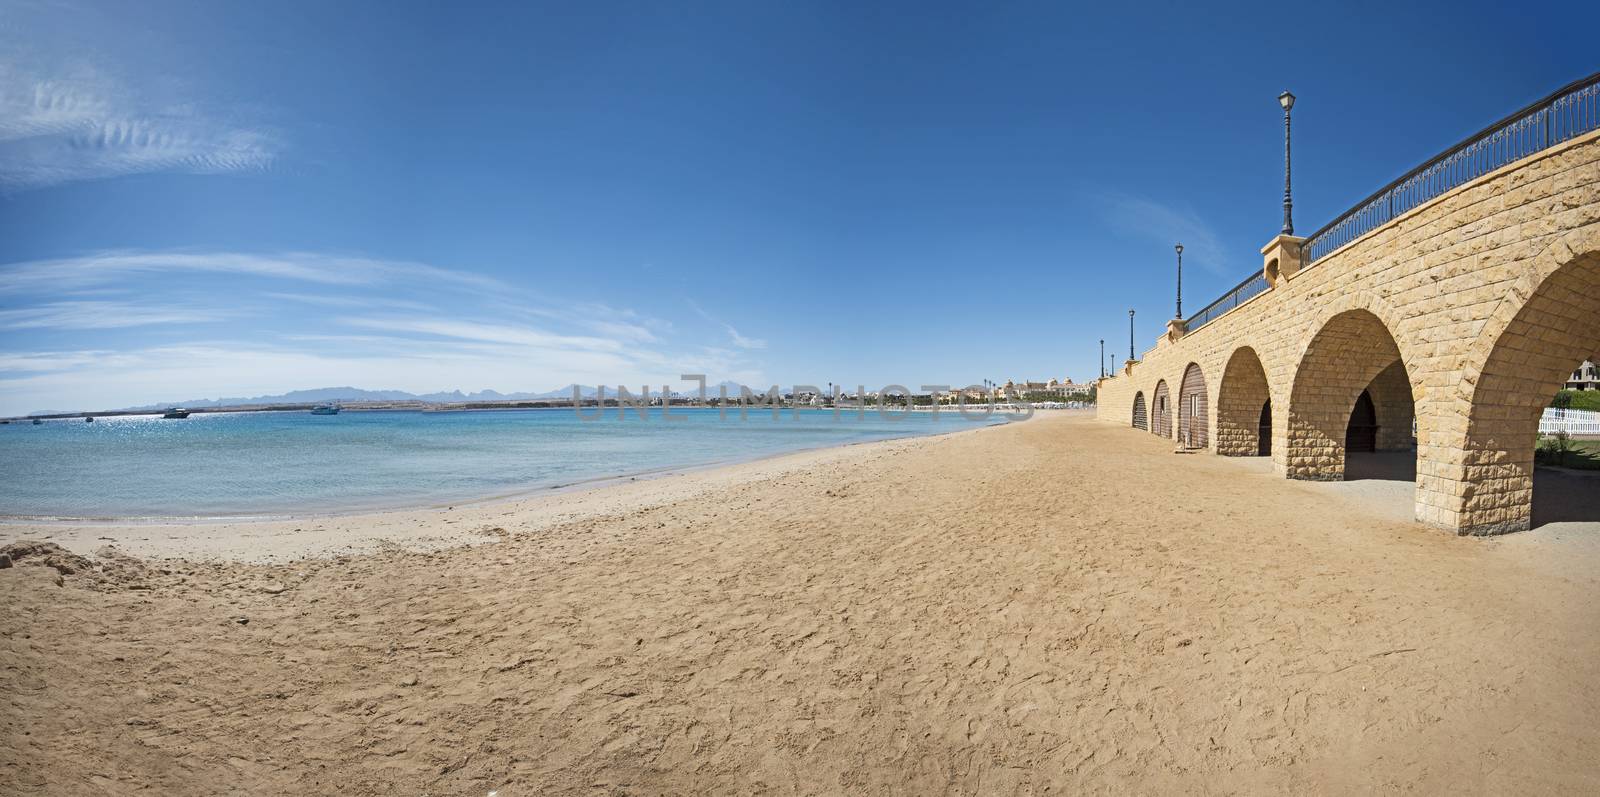 View across an empty tropical beach with stone bridge and arches by paulvinten